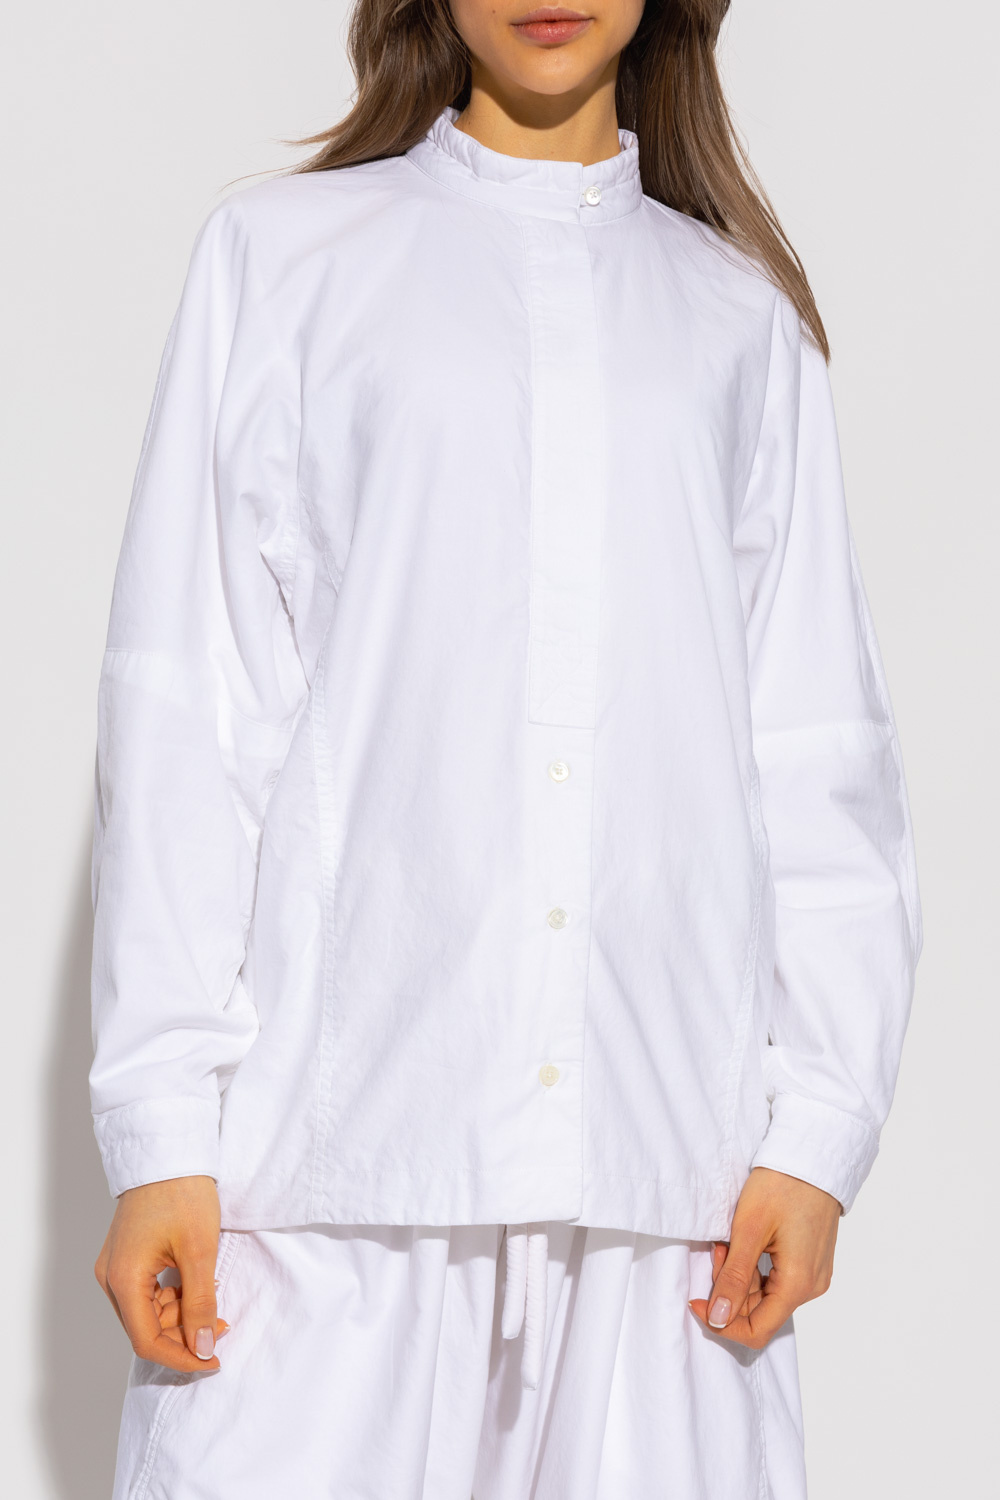 Lemaire Tall Marble Print Shirt